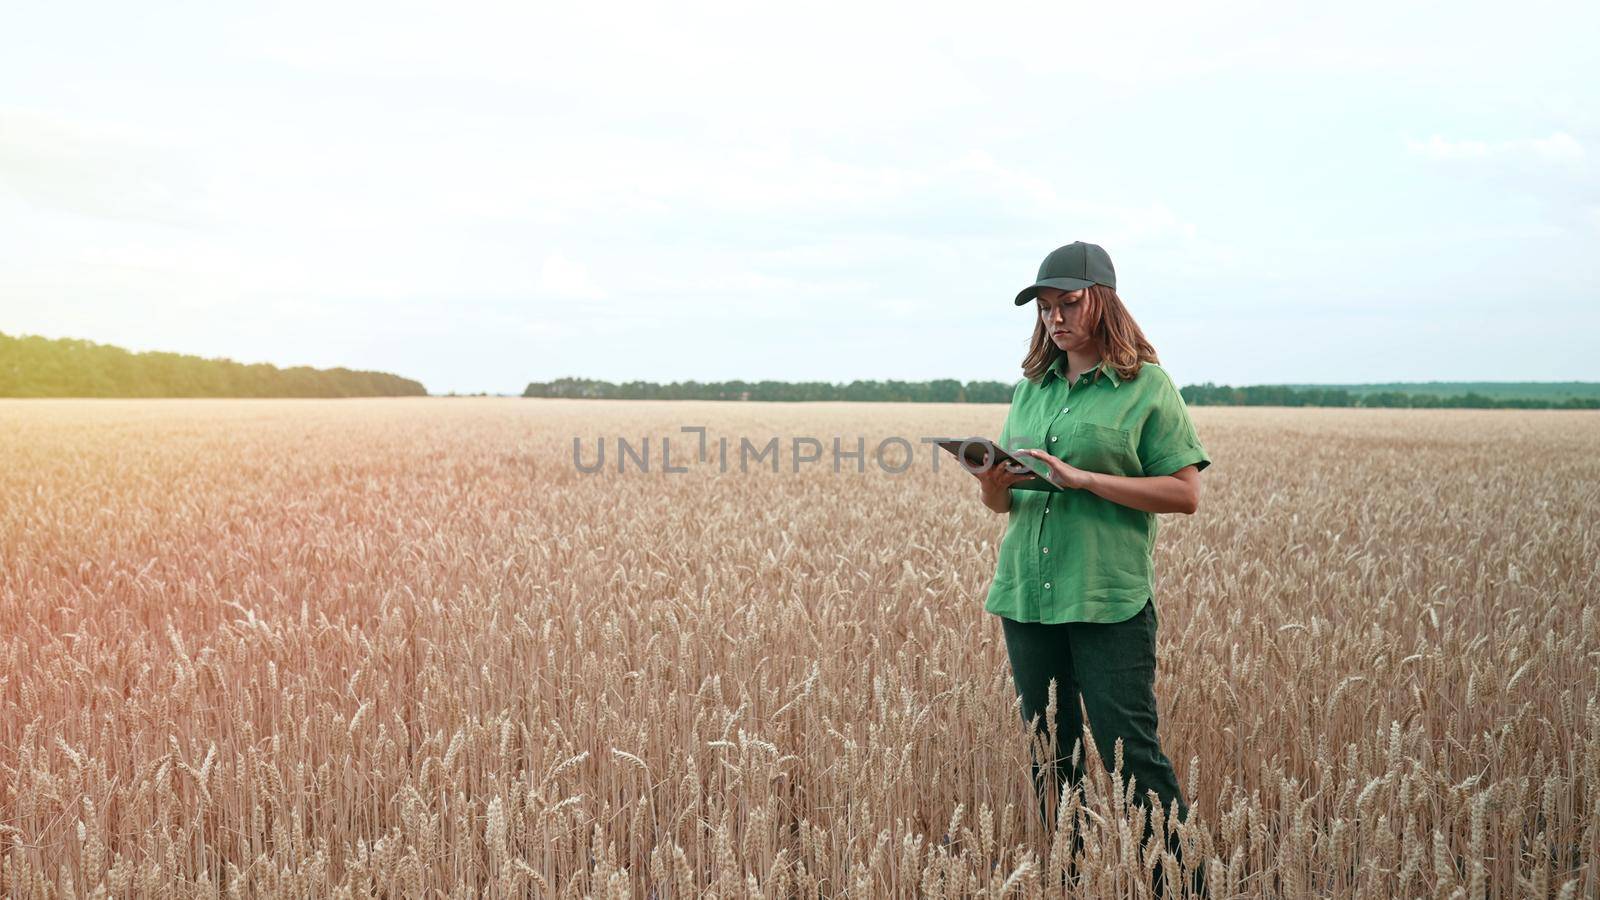 Woman agronomist works in ripe wheat field with digital tablet, checking integrity of ears, growth. Agricultural business, technology, smart eco system, harvest concept. High quality photo